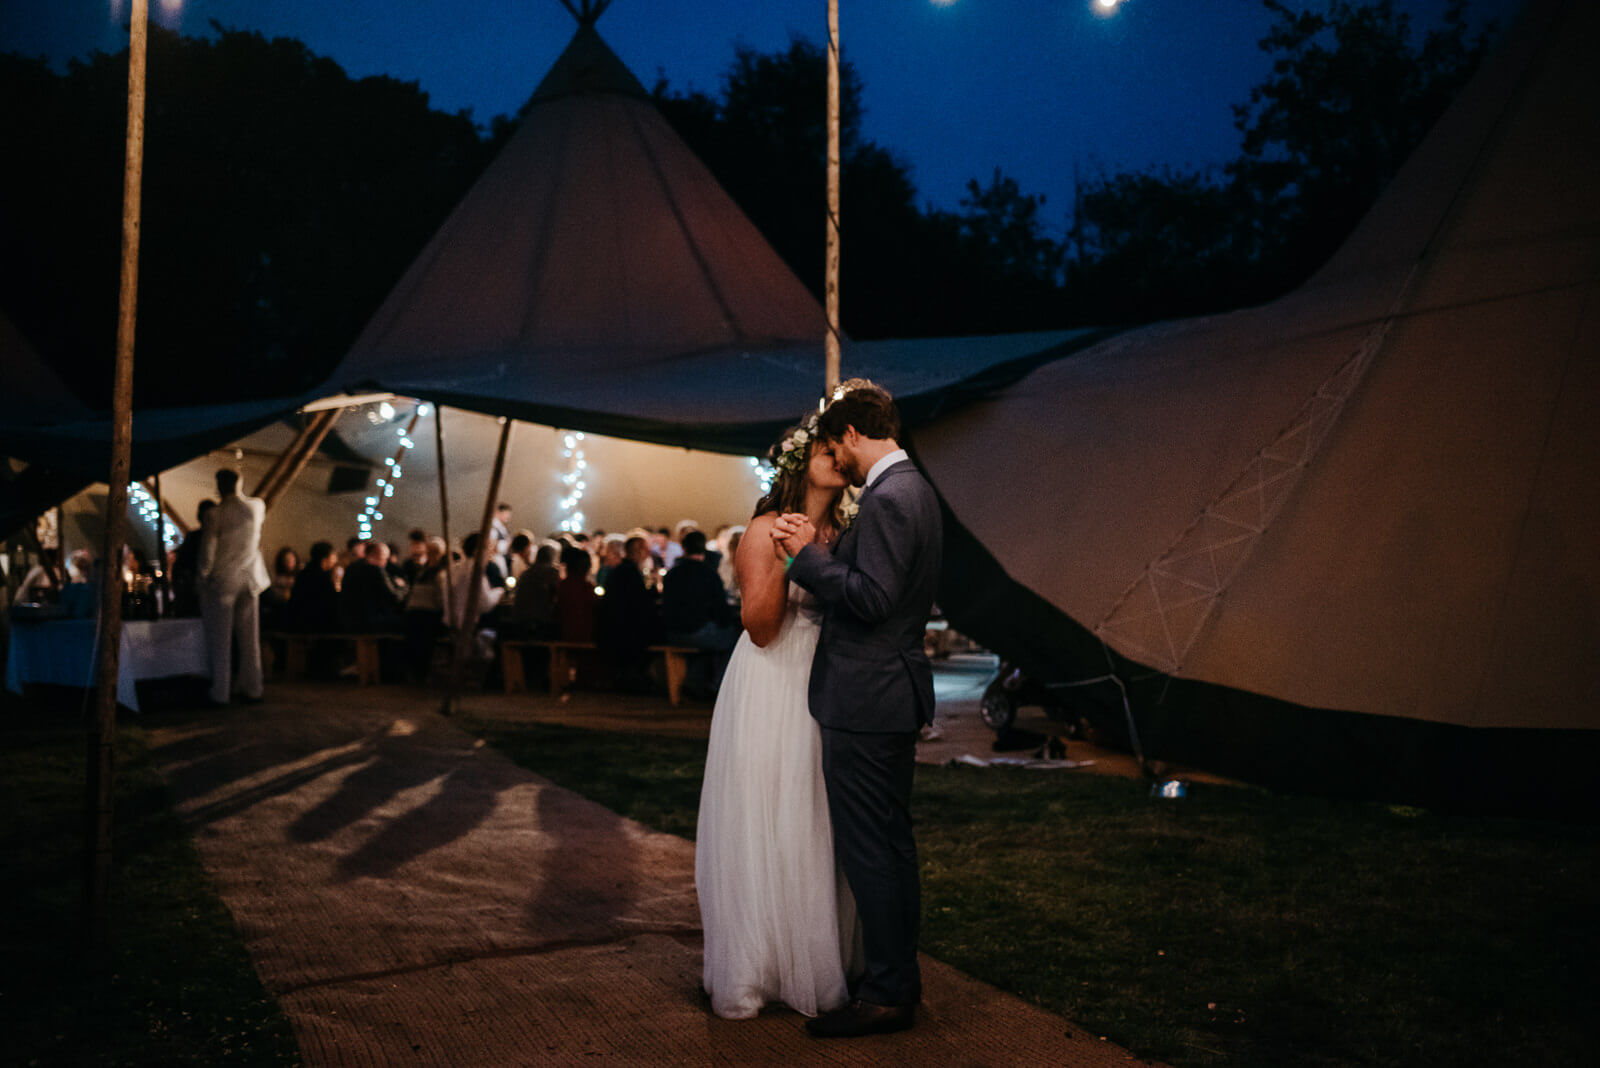 Bride and groom dancing in darkness with light coming from tipi and festoon lighting